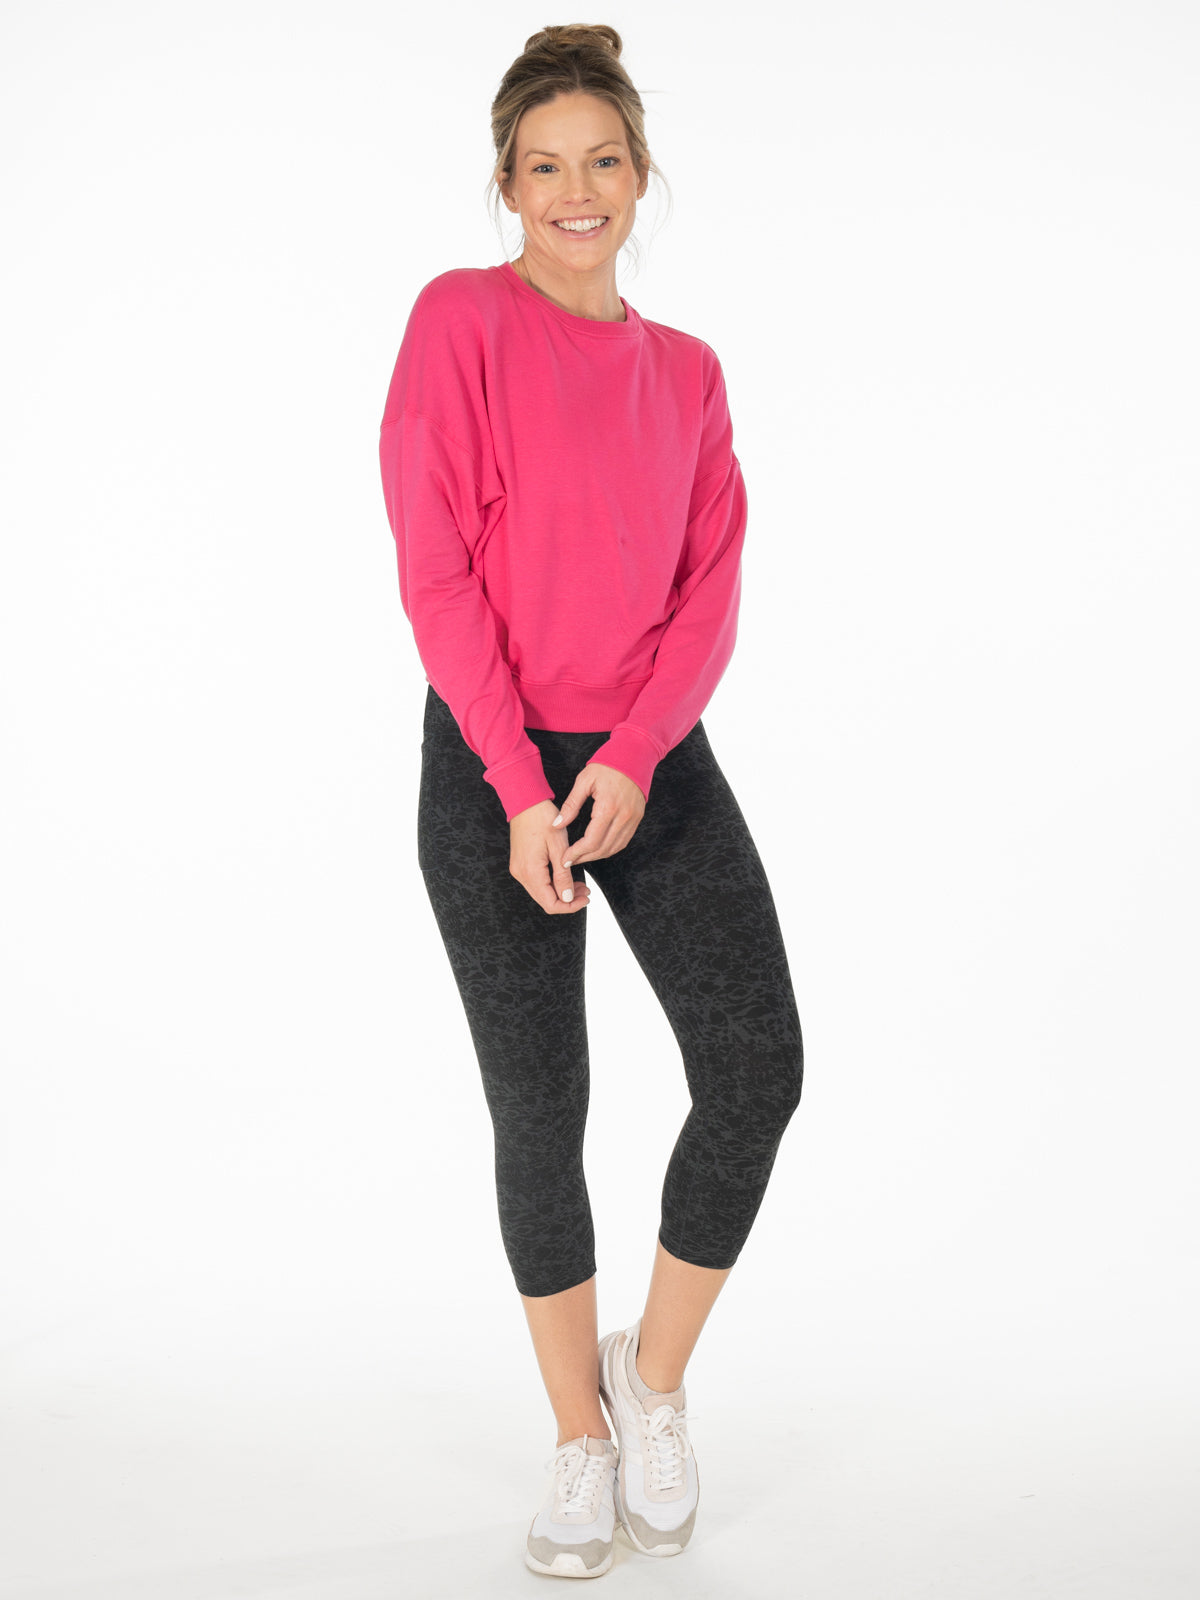 Women's Buttery Soft Activewear Leggings with Pockets (Small only) -  Wholesale 